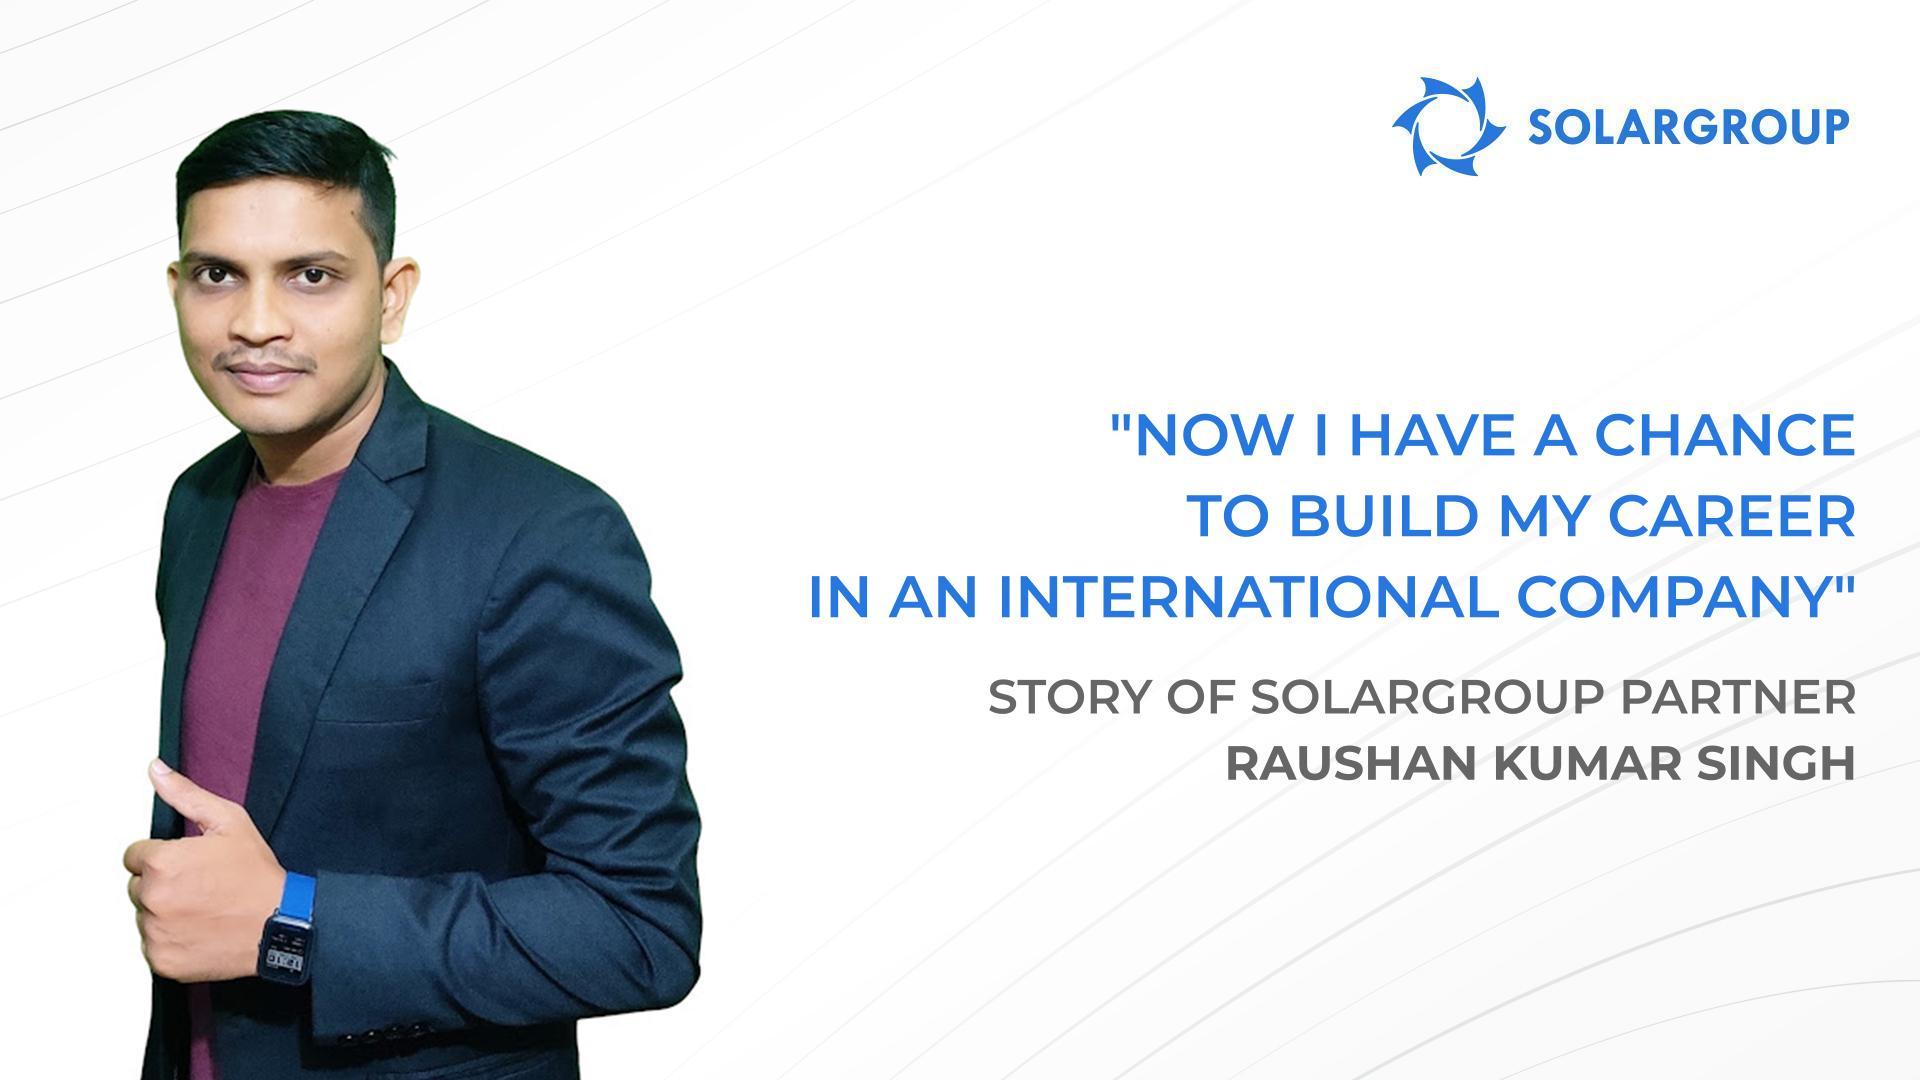 With SOLARGROUP I have the opportunities I could only dream of | Story of SOLARGROUP partner Raushan Kumar Singh, India